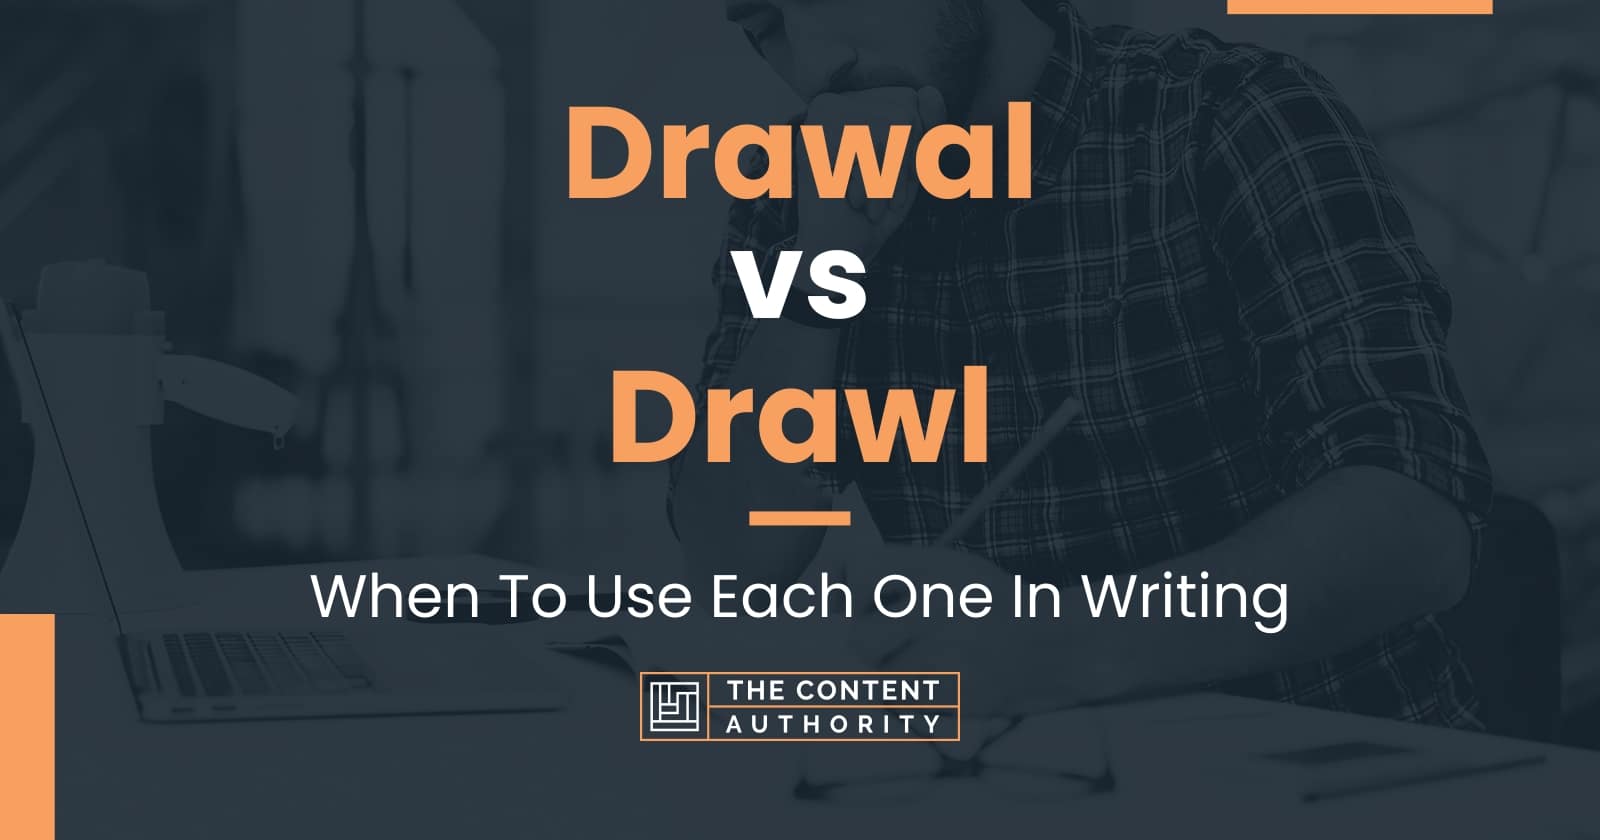 Drawal vs Drawl When To Use Each One In Writing